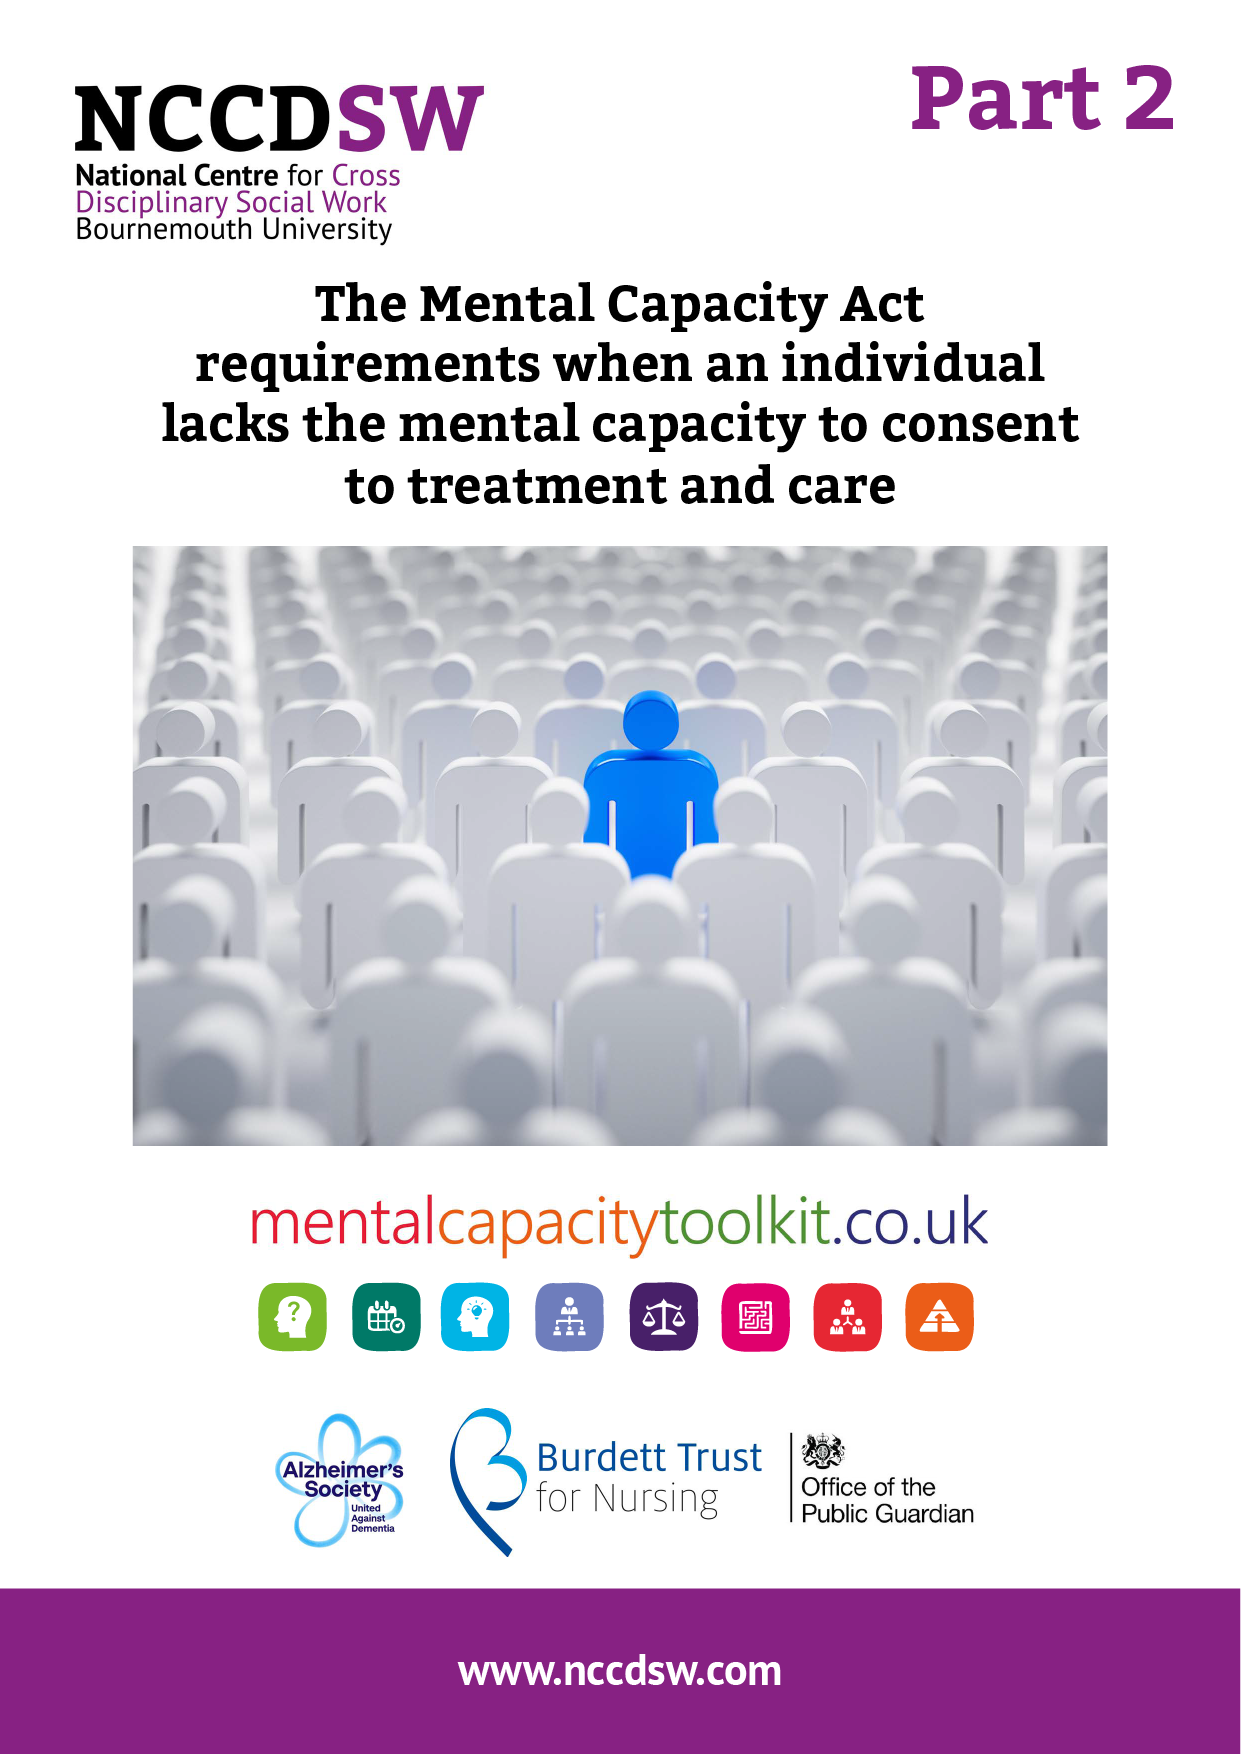 New Publication: The Mental Capacity Act requirements when an individual lacks the mental capacity to consent to treatment and care